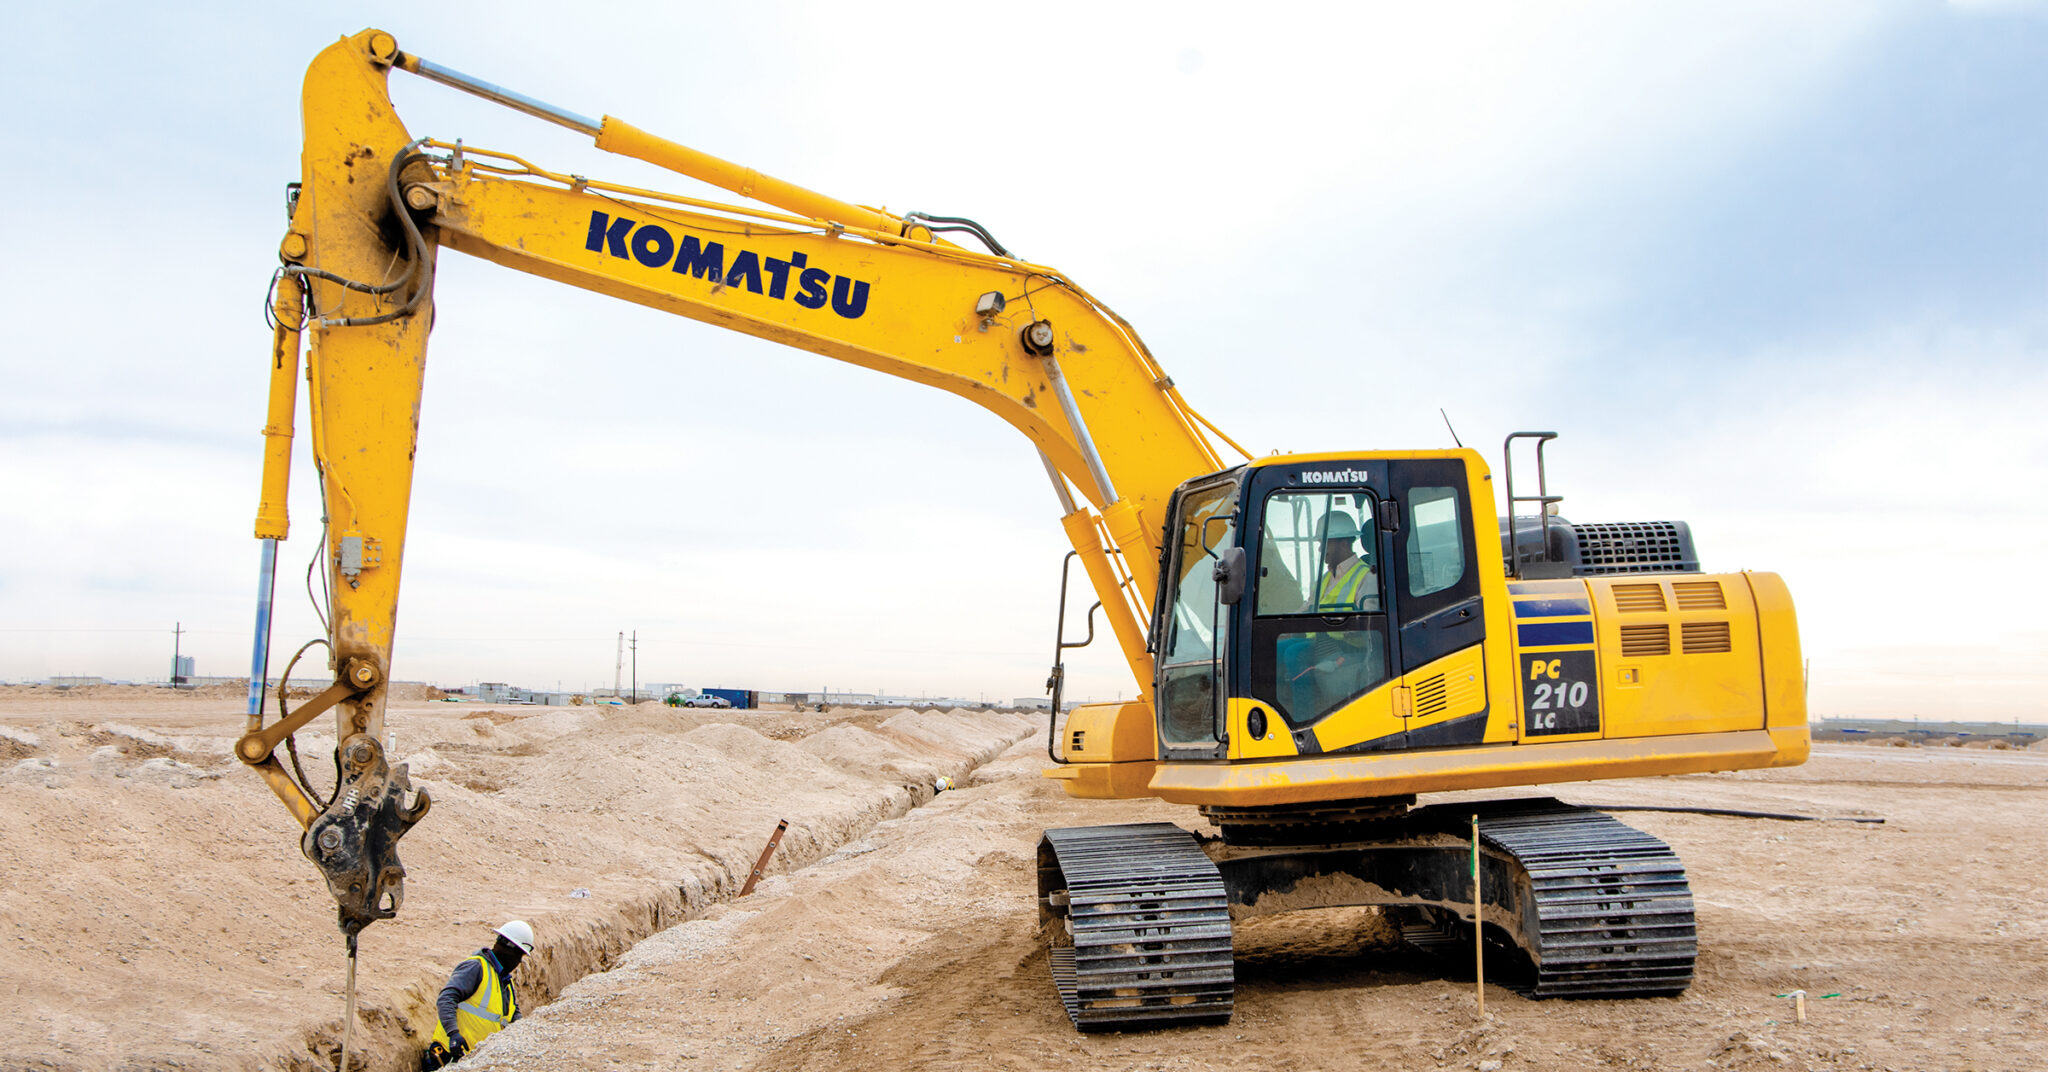 Trenching | Construction workers working in a trench along with a Komatsu PC210LC excavator